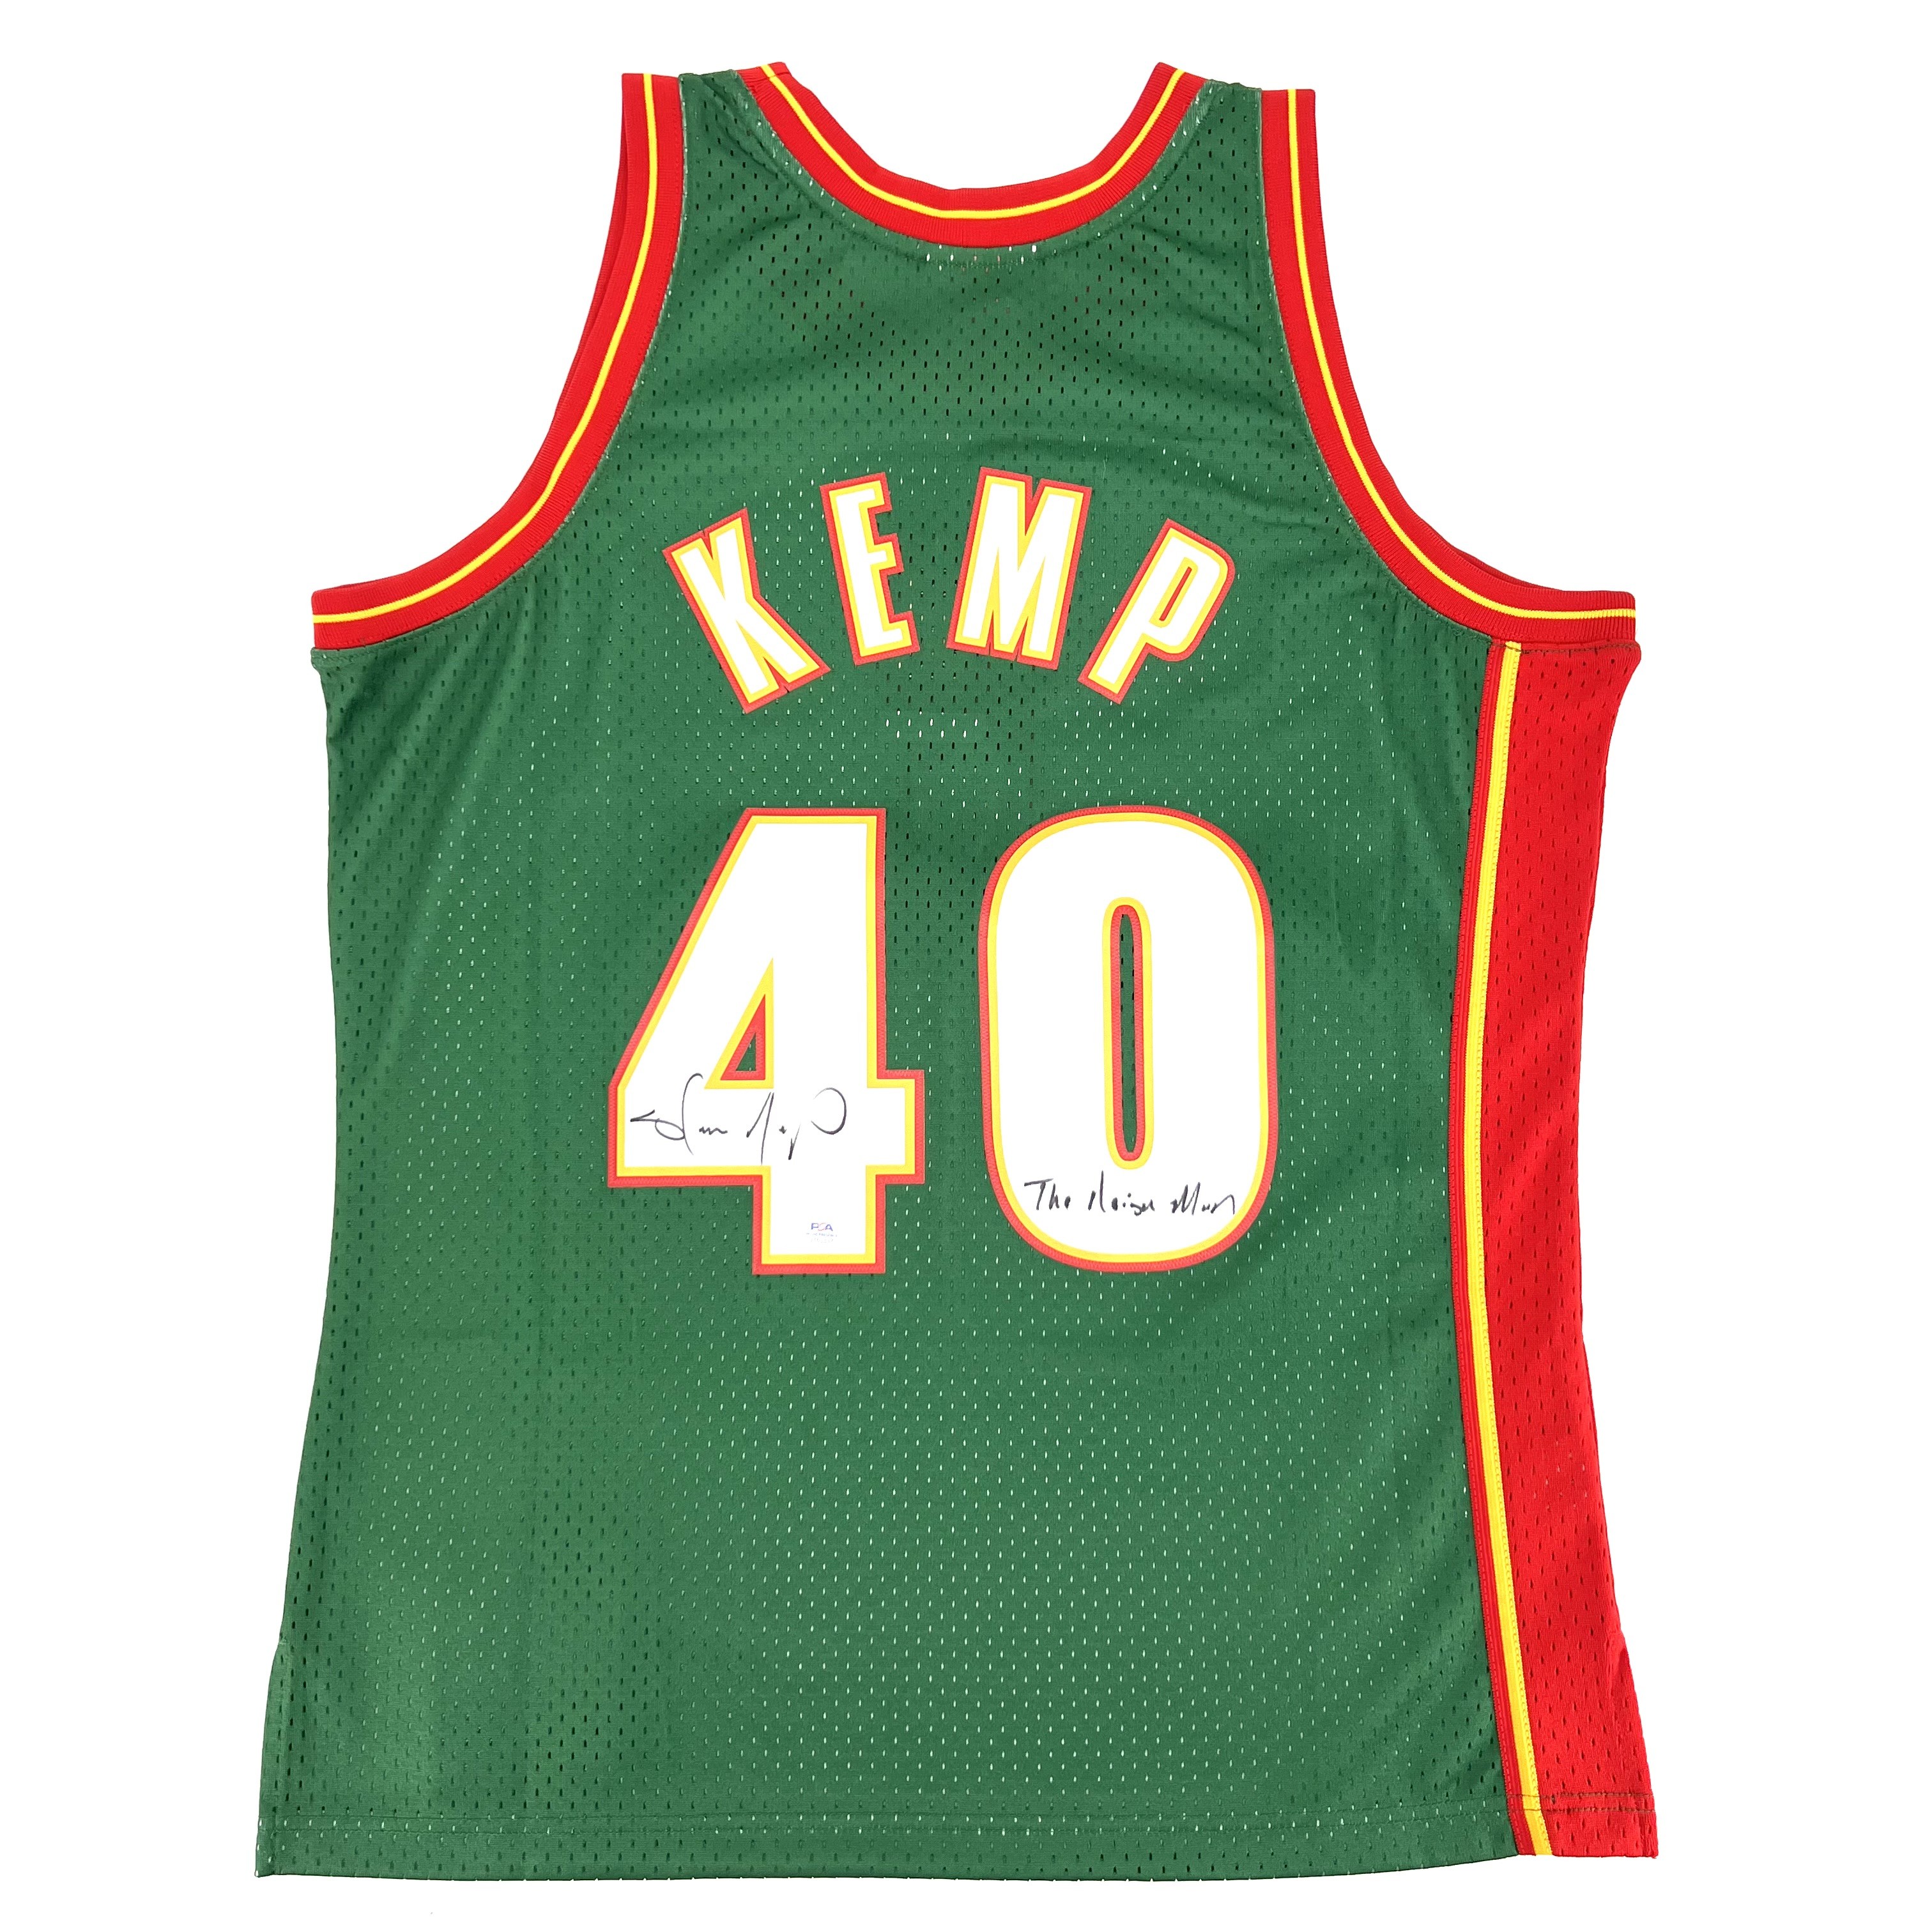 Seattle SuperSonics Signed Jerseys, Collectible Sonics Jerseys